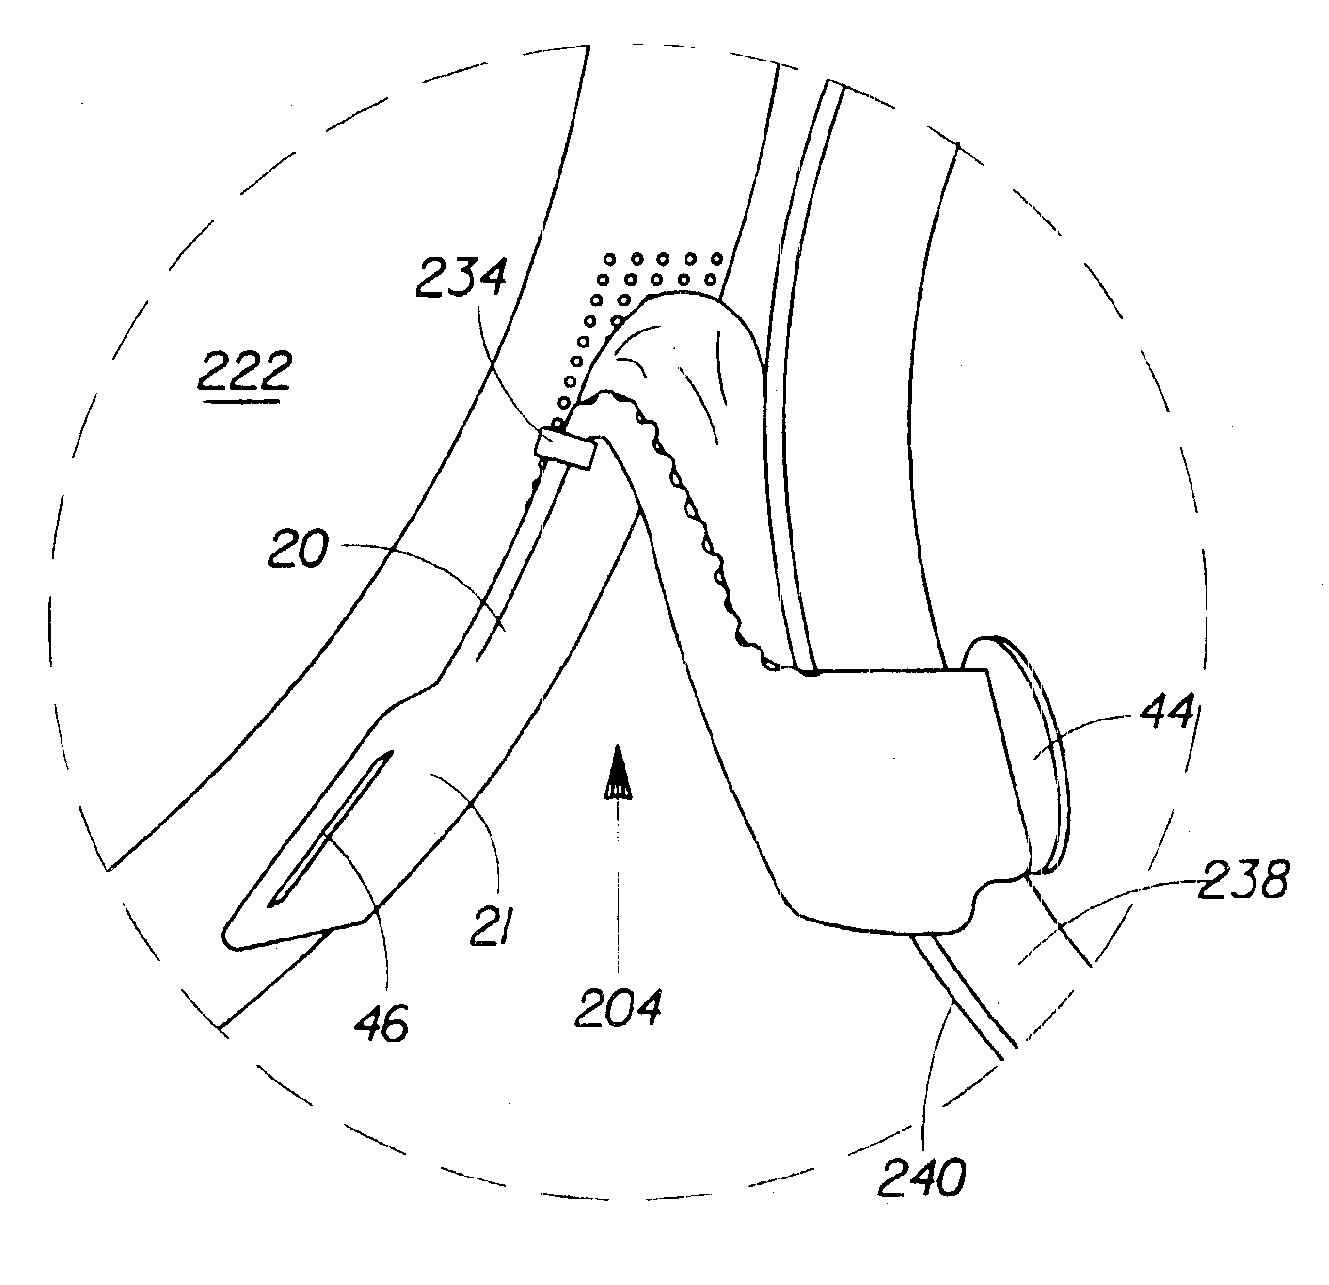 Method of dynamically pre-fastening a disposable absorbent article having a slot-and-tab fastening system